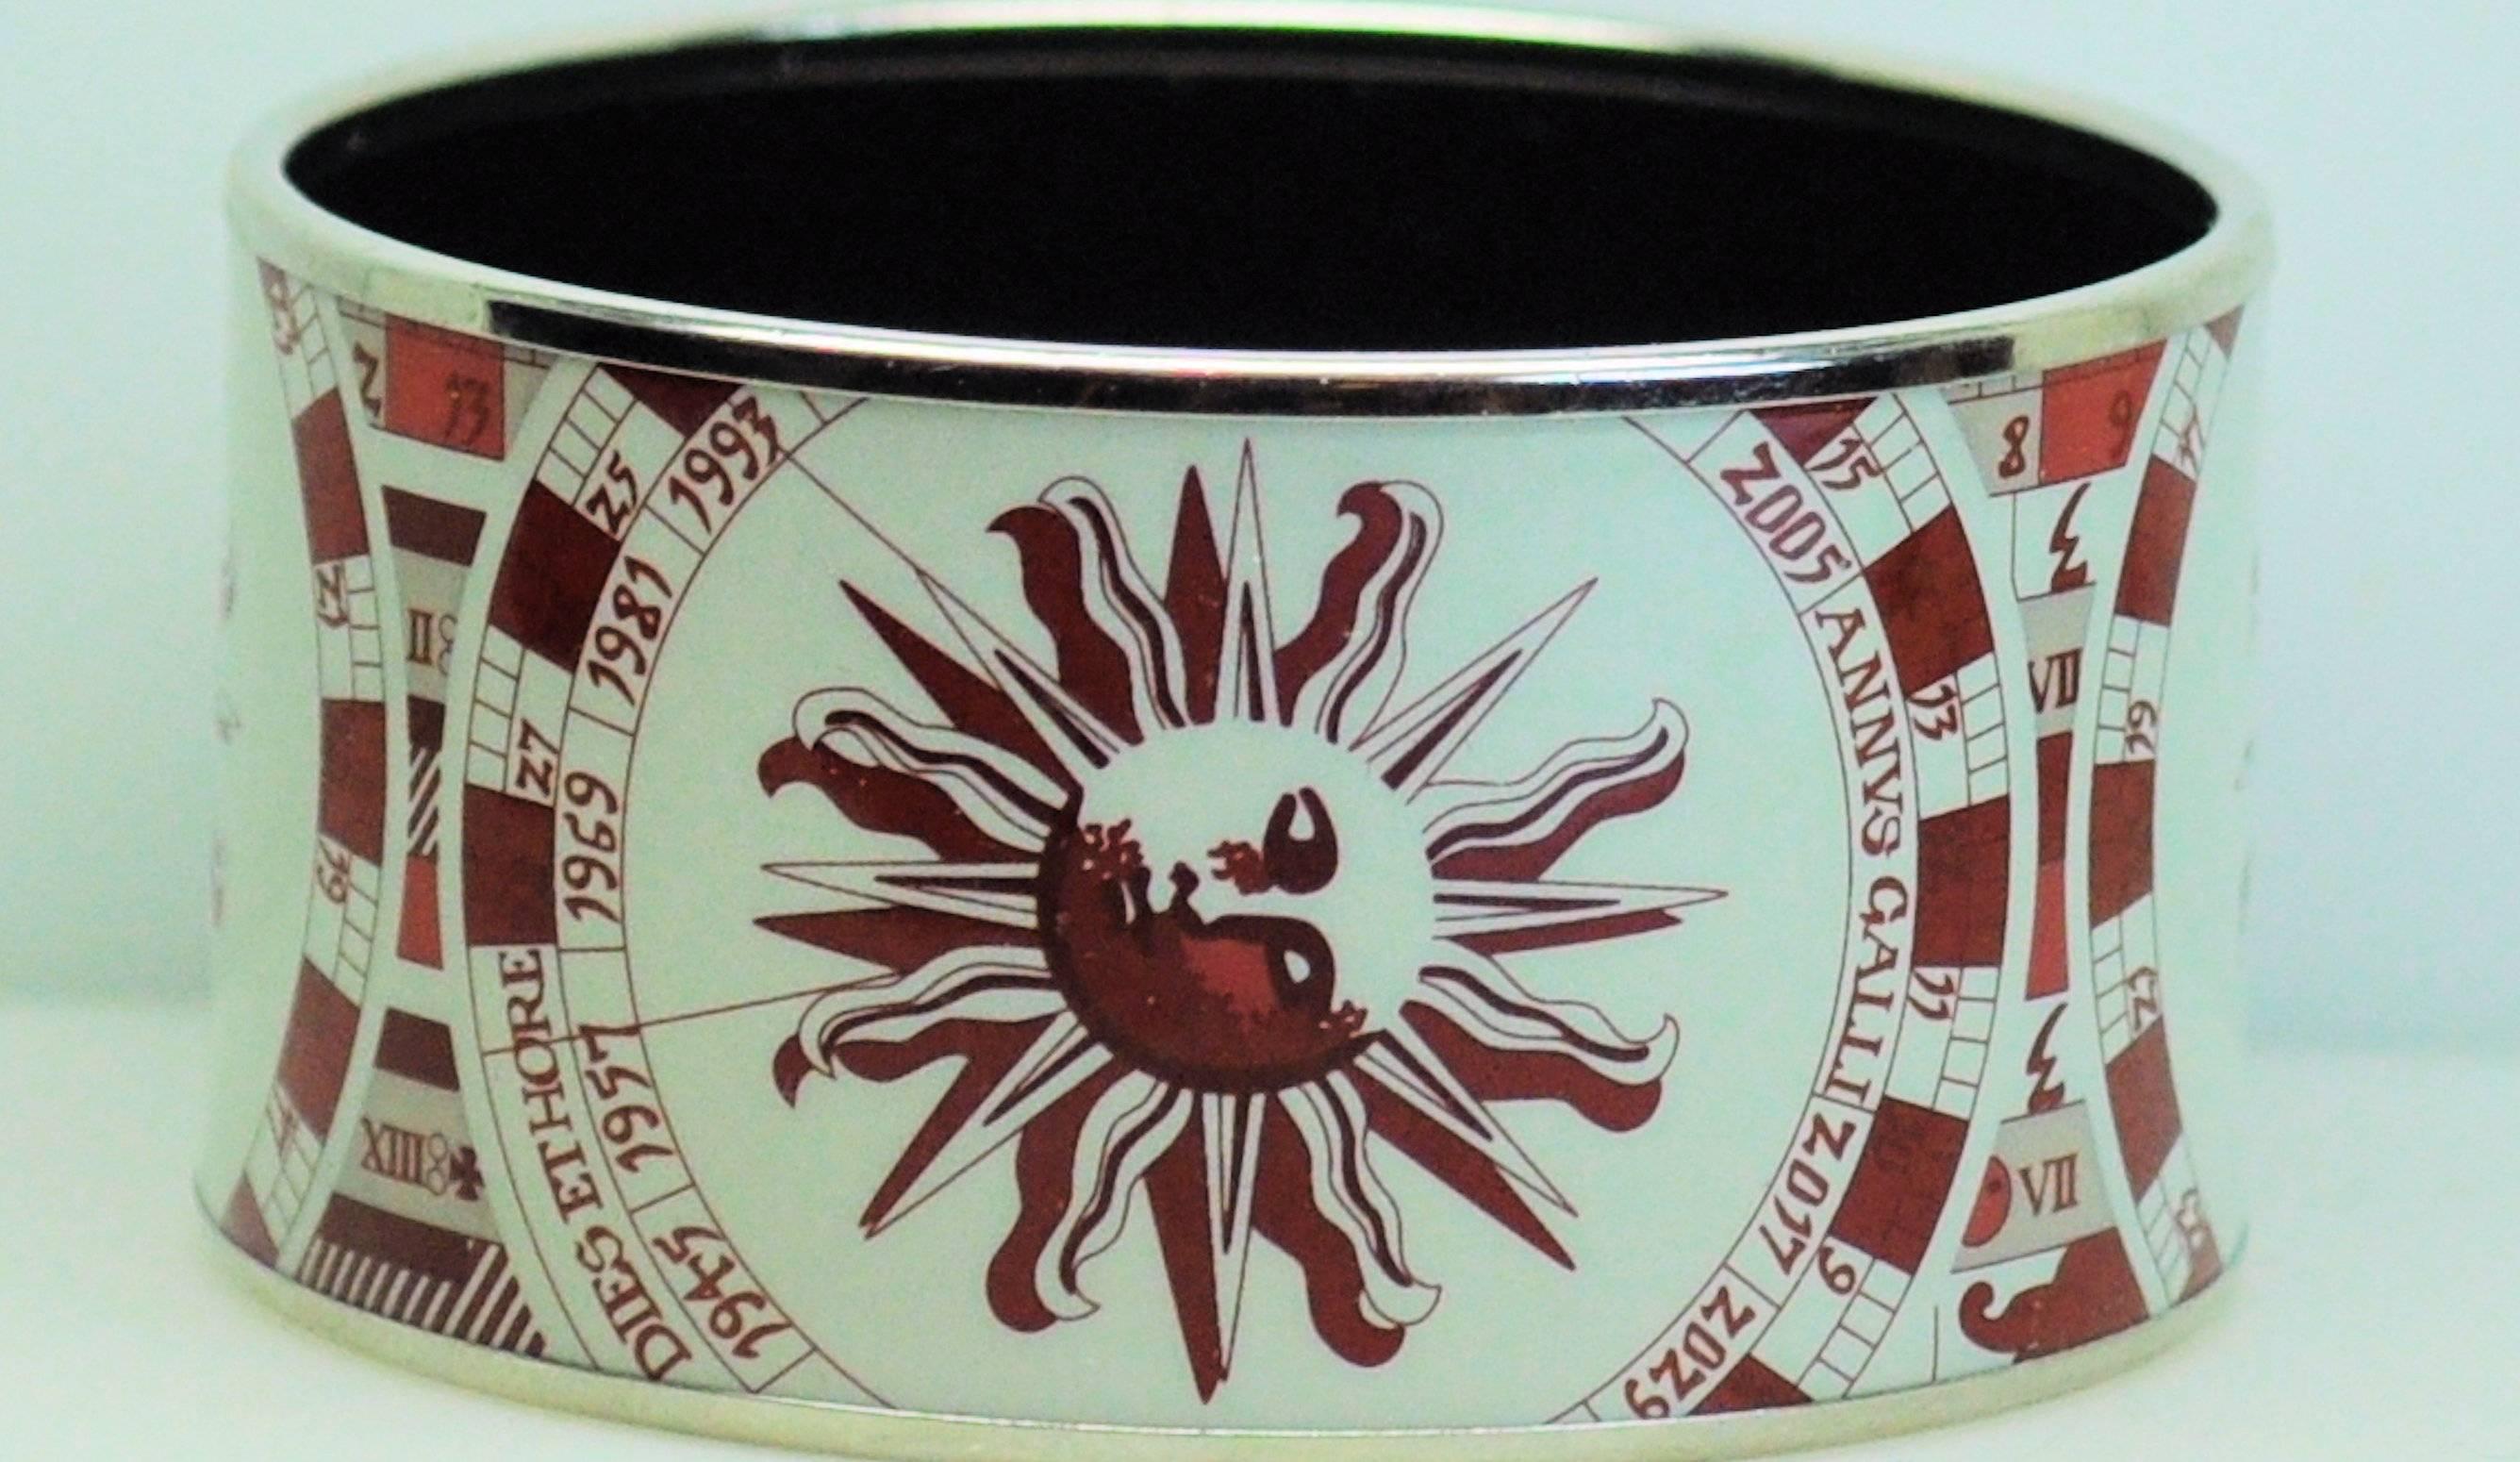 Vintage Hermes wide bangle bracelet in shades of red on white background, sunface and zodiac symbols. 
Made in Austria, signed Hermes Paris. Date letter +M